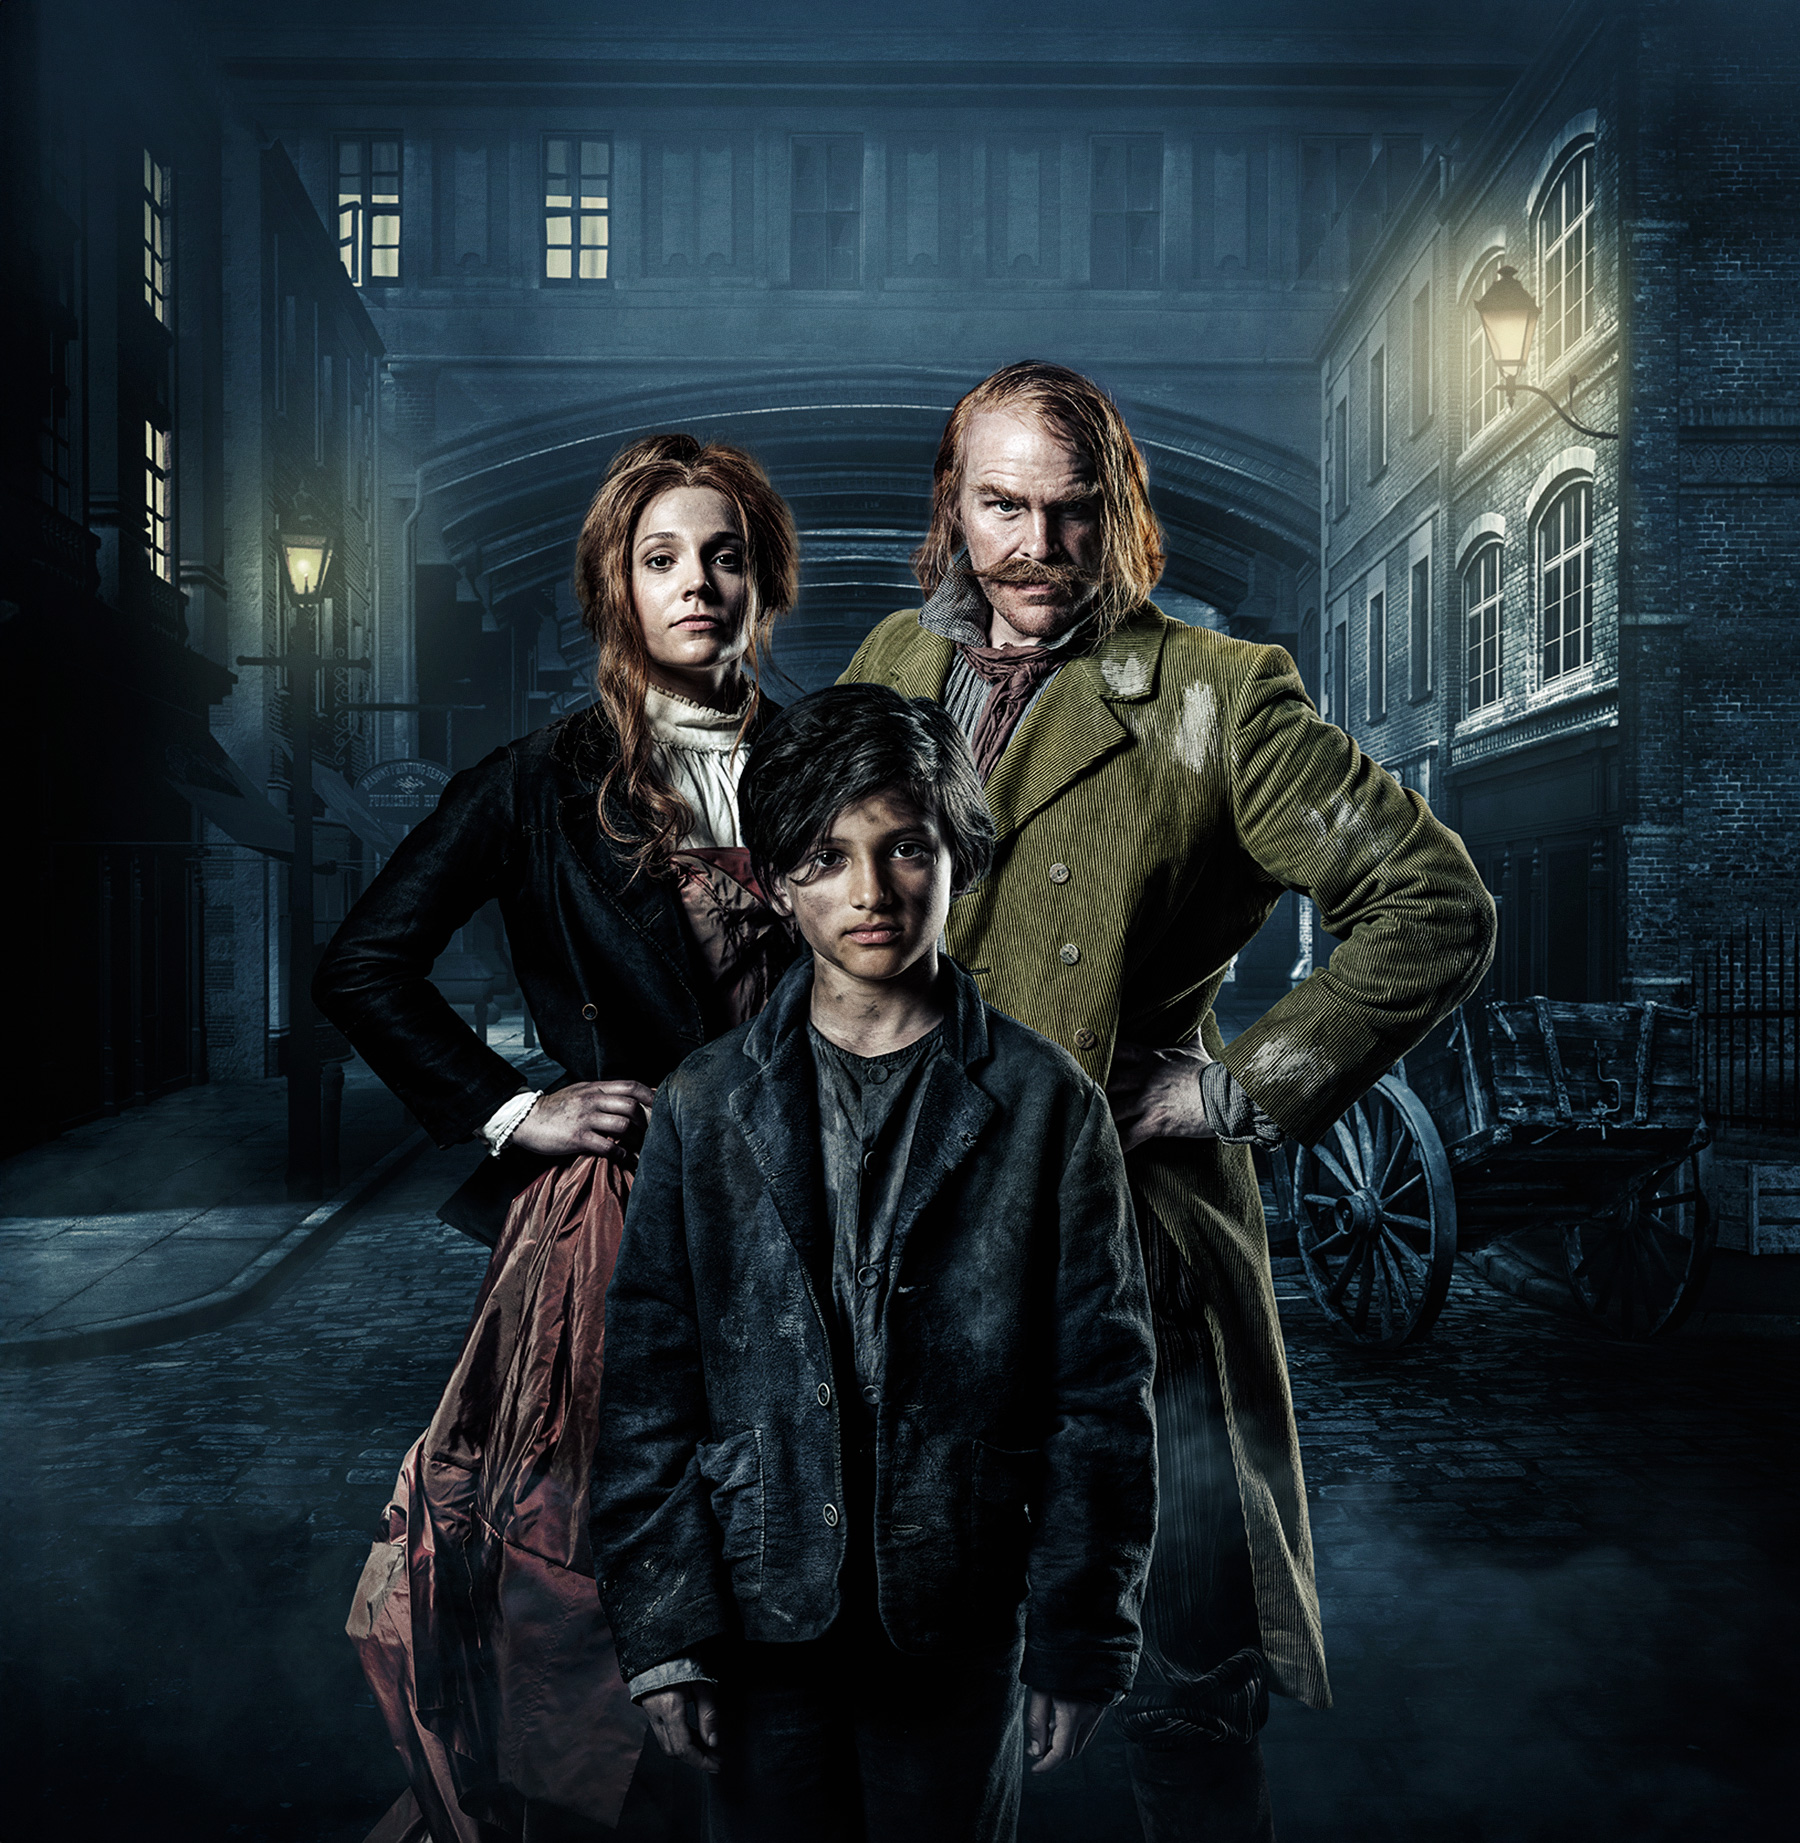 Three individuals stand on a dark, foggy street within a historical setting. Their attire reflects the style of the 19th century. On the left, a woman dons a dress; to the right, a man is dressed in a suit, with a child in more casual, relaxed clothing in the middle. The backdrop reveals a dim, mist-filled lane flanked by historical buildings and street lamps casting a faint glow. A horse and carriage are further discernable in the background, indicating the scene represents a previous era. The atmosphere is somber and mystifying, amplified by the dim light and the shadows enveloping the figures and structures.